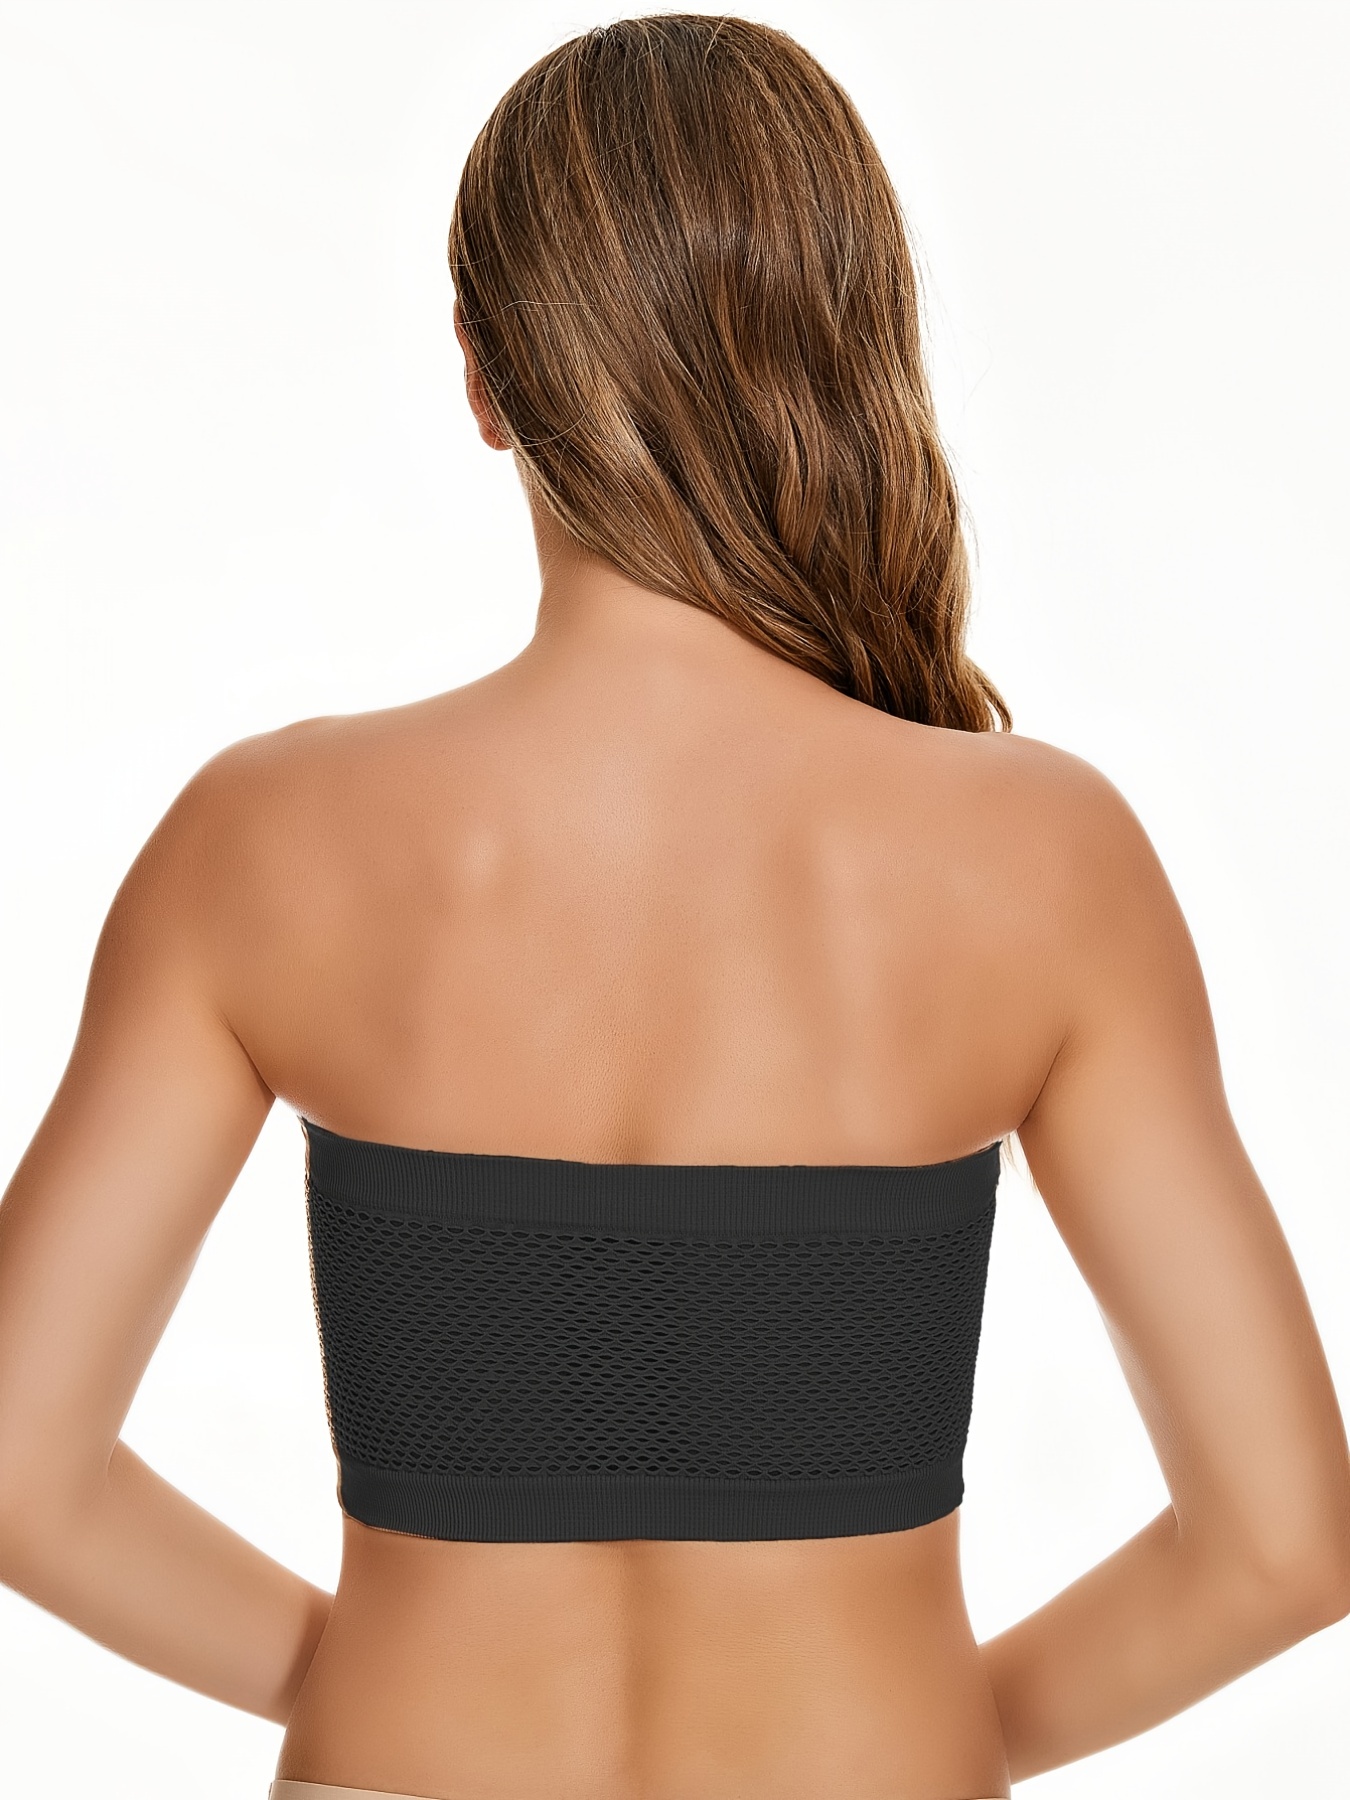  Girls Strapless Bandeau Bra - Seamless Training Bras for Teens.  Bustier Bra with Sponge Pad for Backless Dress Daily Clothing. 4 Pack  (Black) : Clothing, Shoes & Jewelry